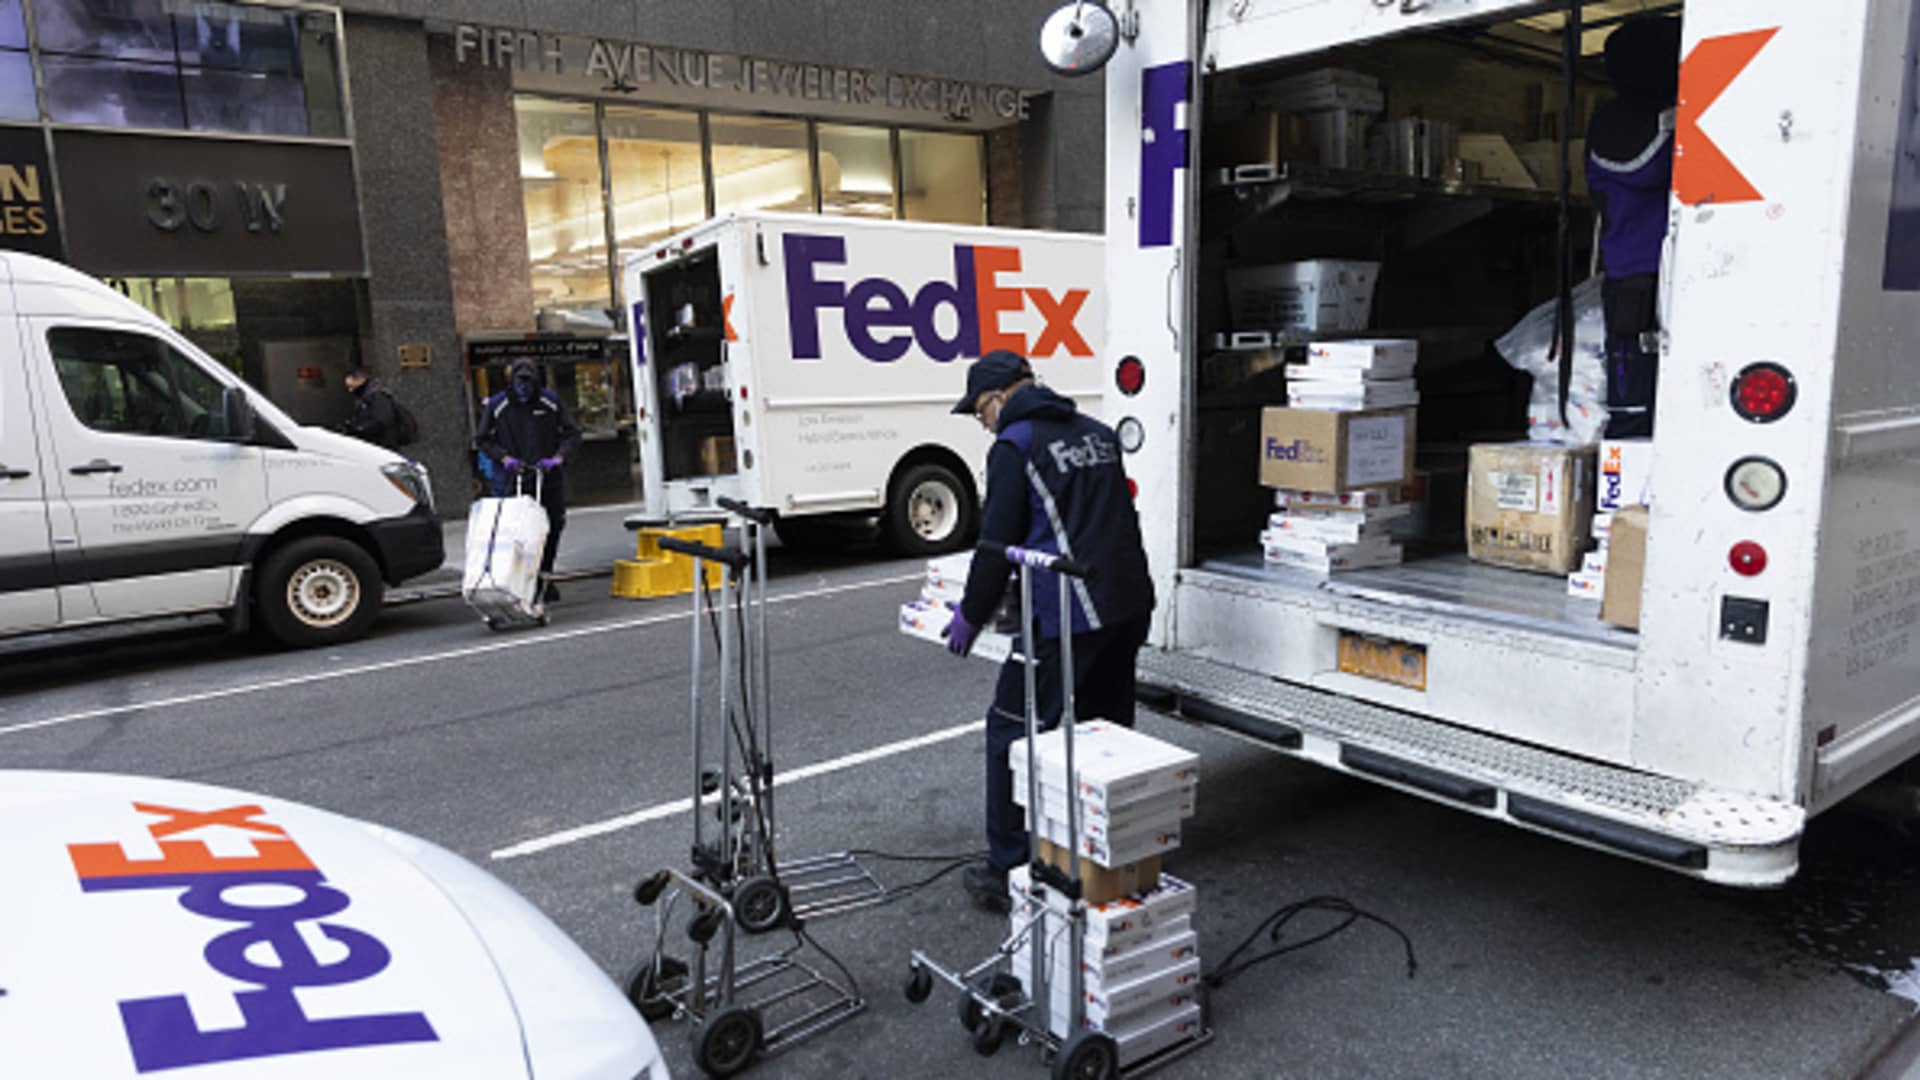 FedEx raises dividend by over 50%, adds two directors to board